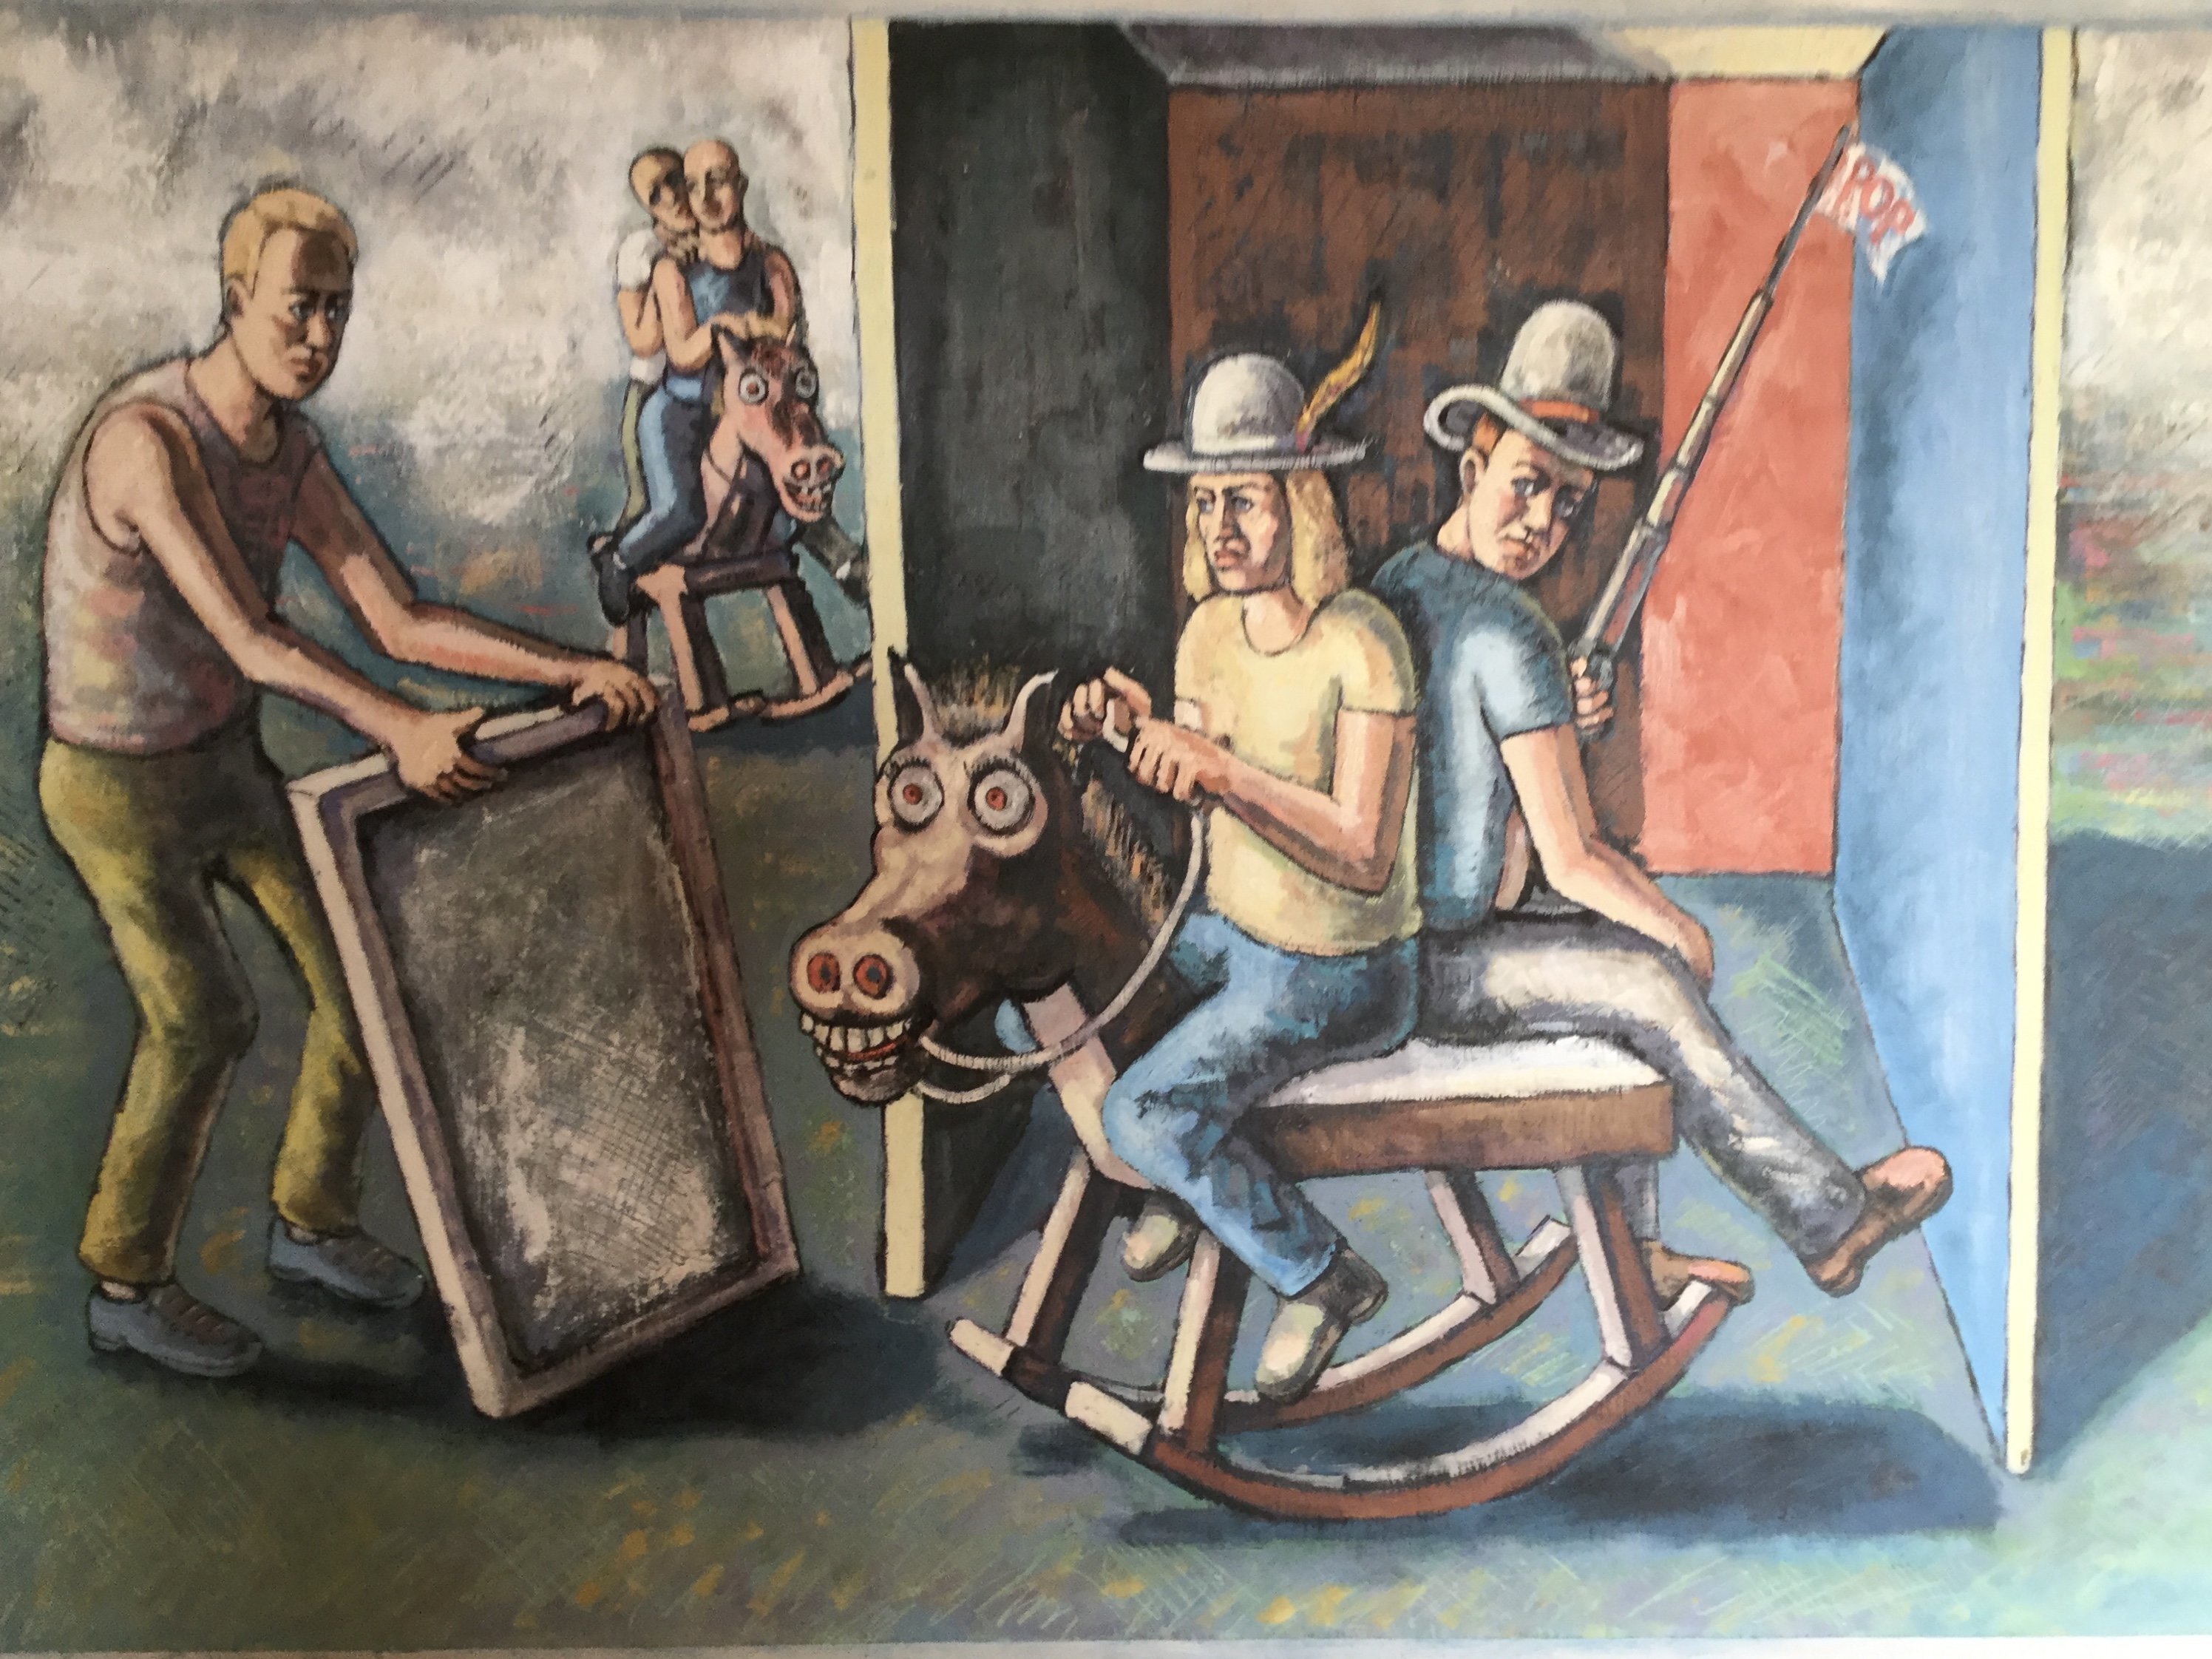 Michael Fornadley: 'Cowboys on crazy horse', 2019 Oil Painting, Political. Literary illusions, 2 cowboys on crazy horse with rocker base, man holding a canvas or mirror, Fog coming in behind 2 distant riders.Compositional walls, leading the eye and confining the center figures. ...